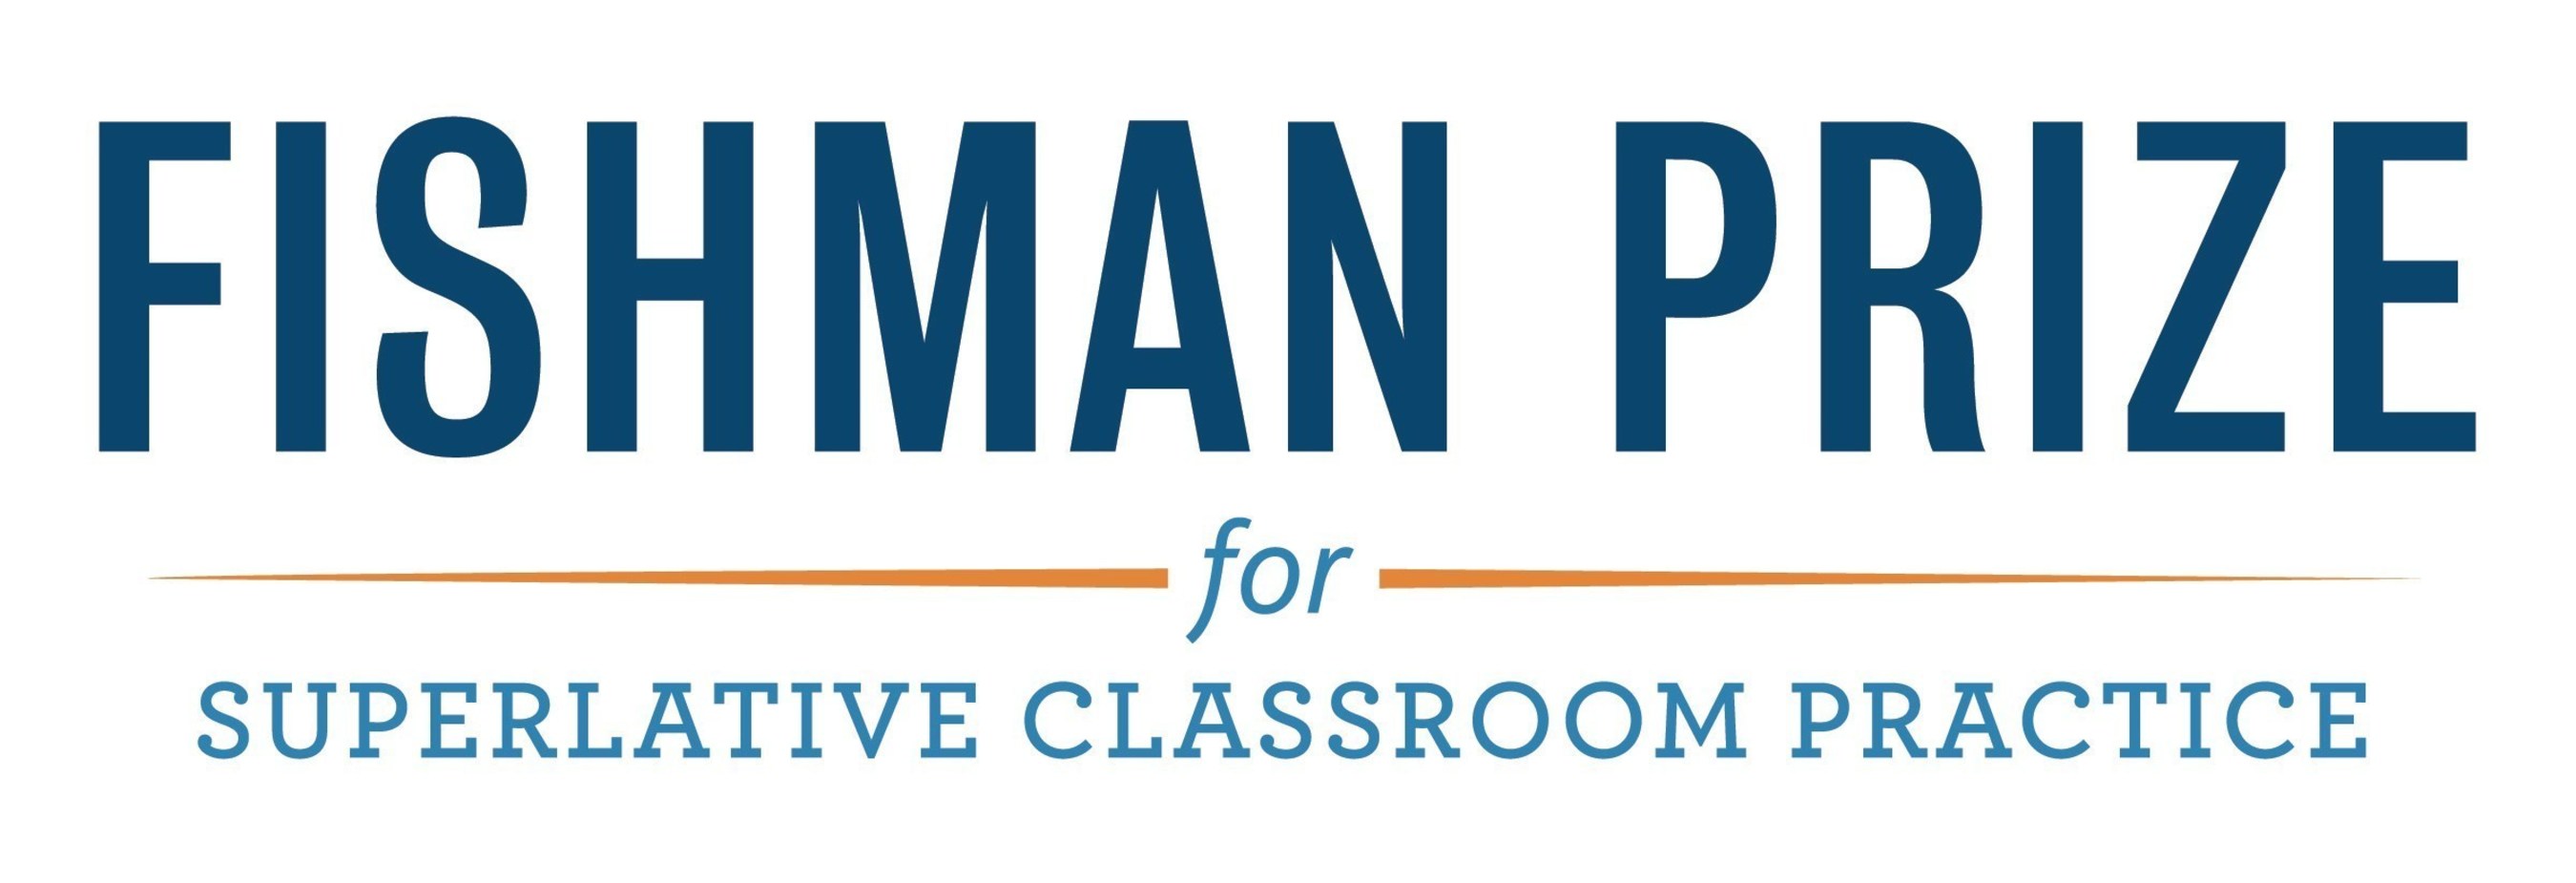 TNTP seeks outstanding teachers from high-poverty schools for $25,000 Fishman Prize. Apply or nominate someone today!